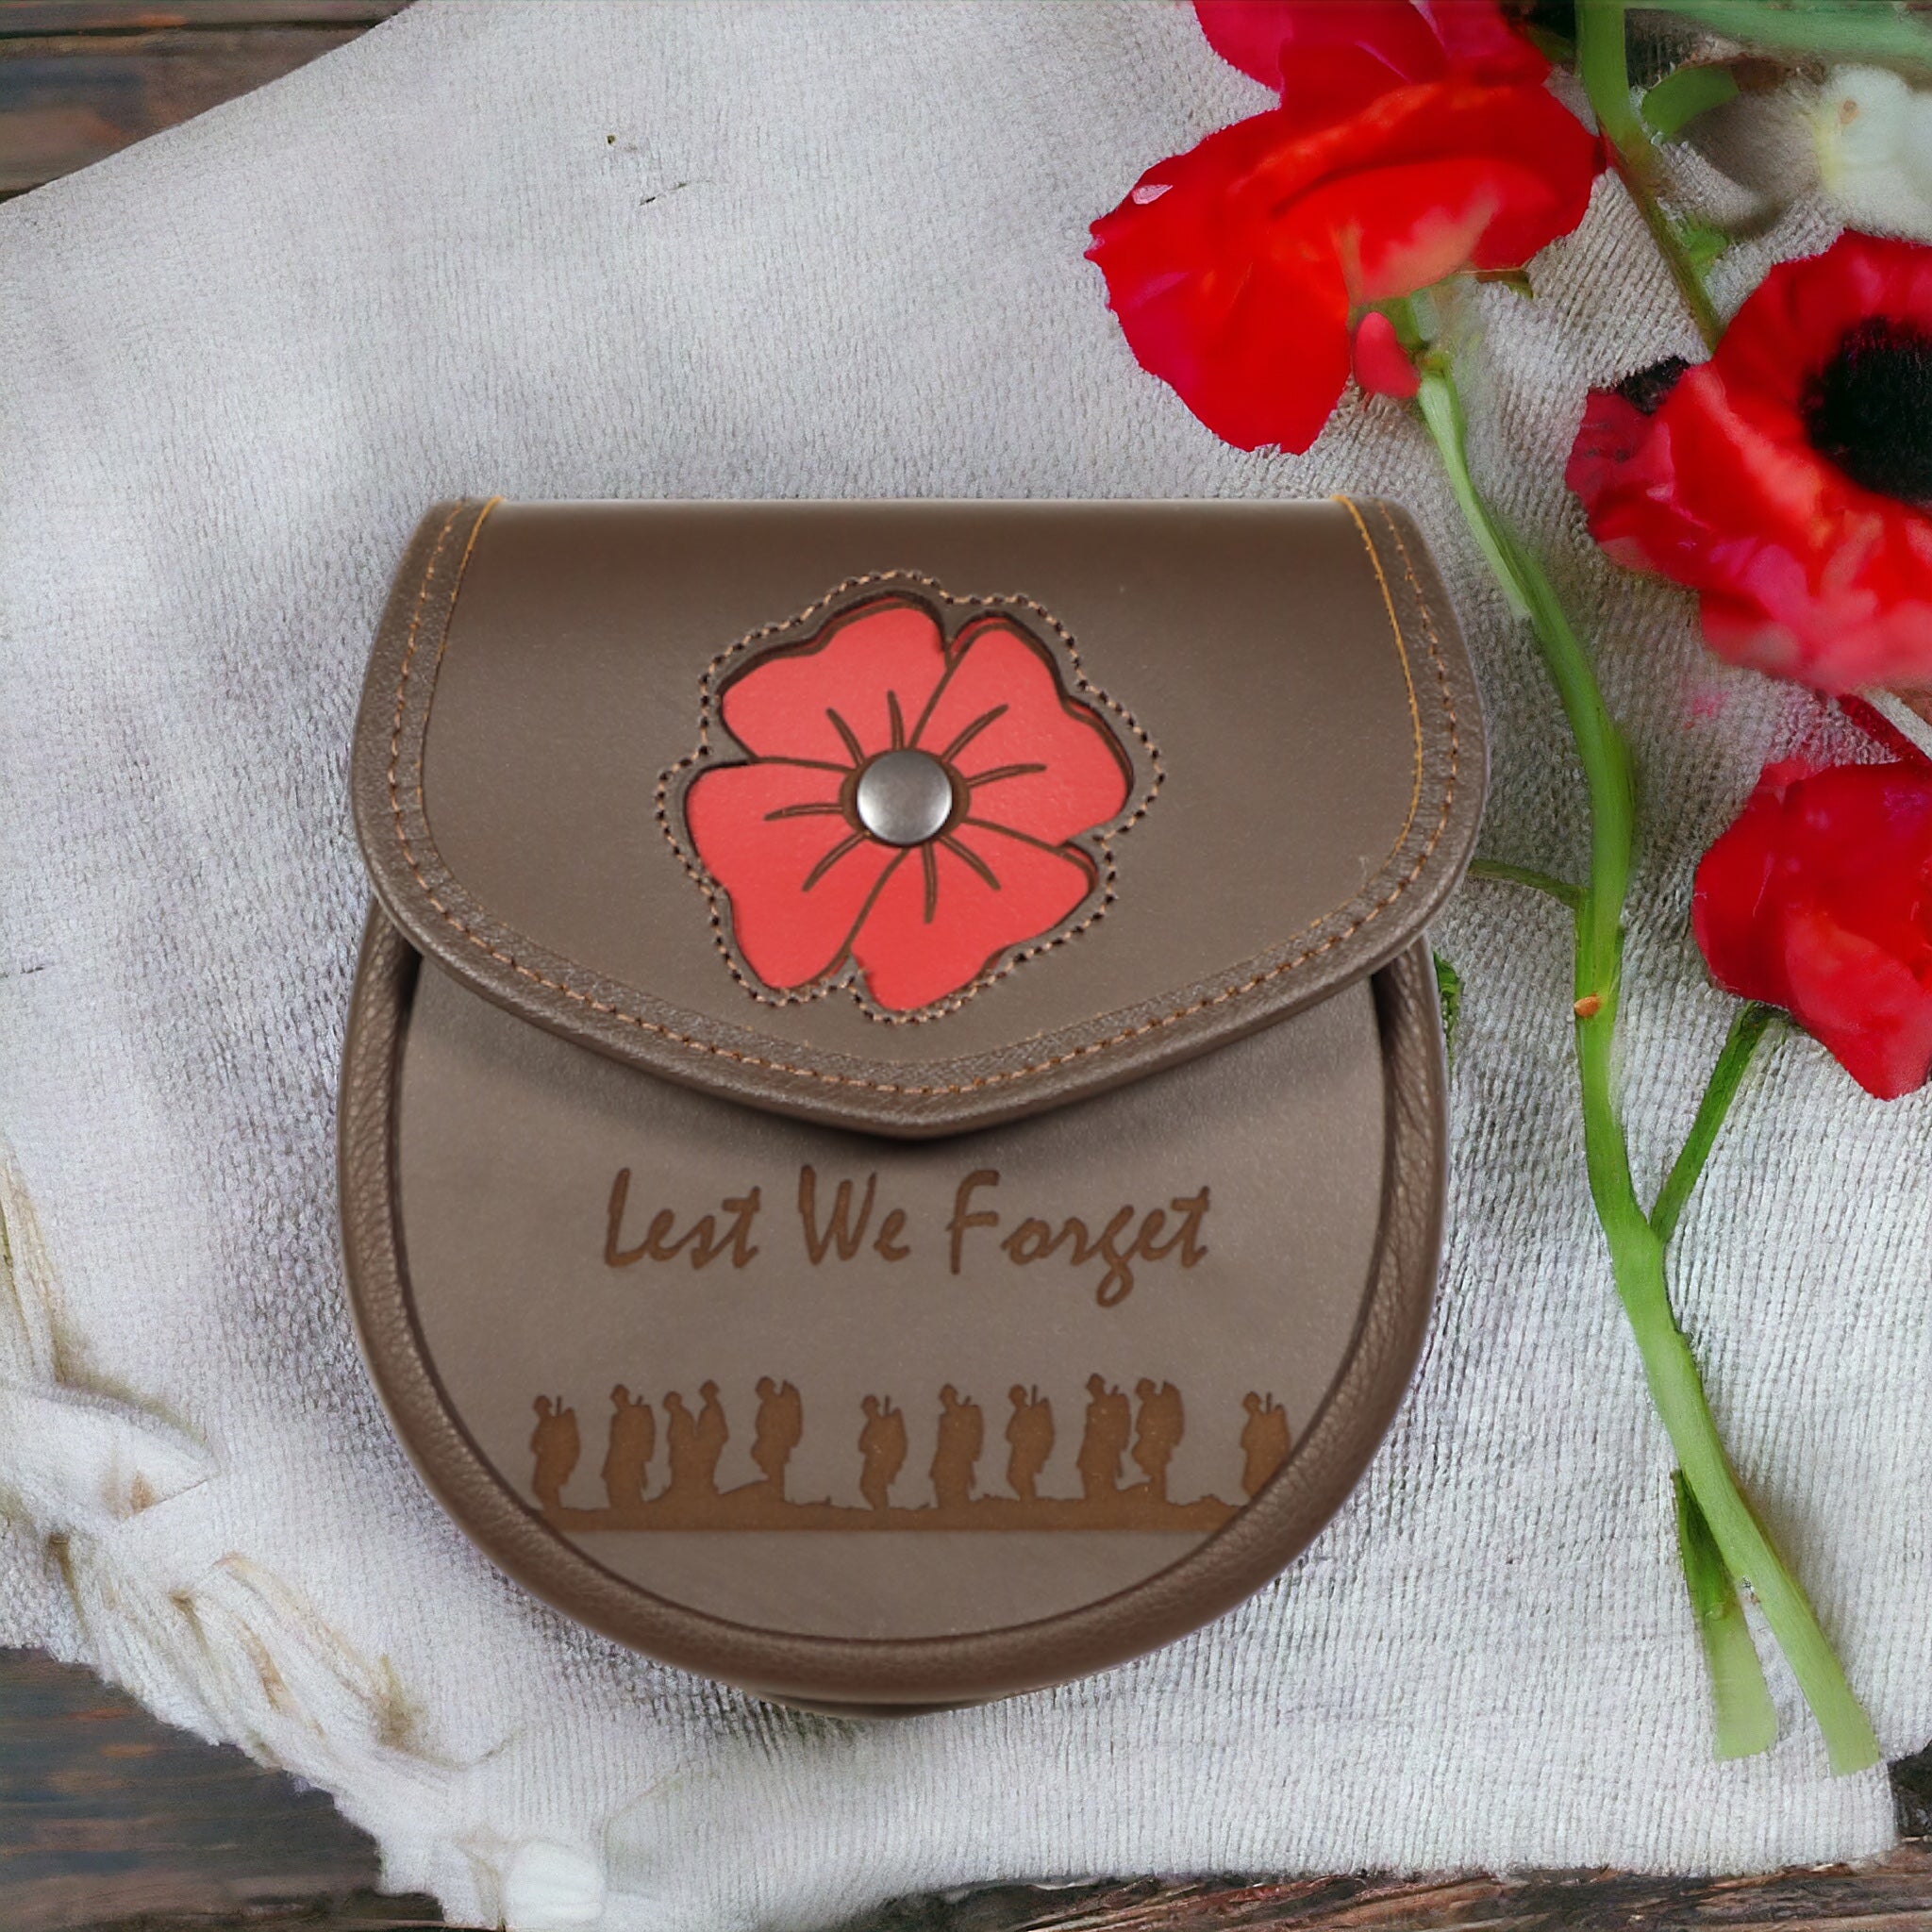 All leather poppy engraved day wear sporran with lest we forget engraving  made by Margaret Morrison